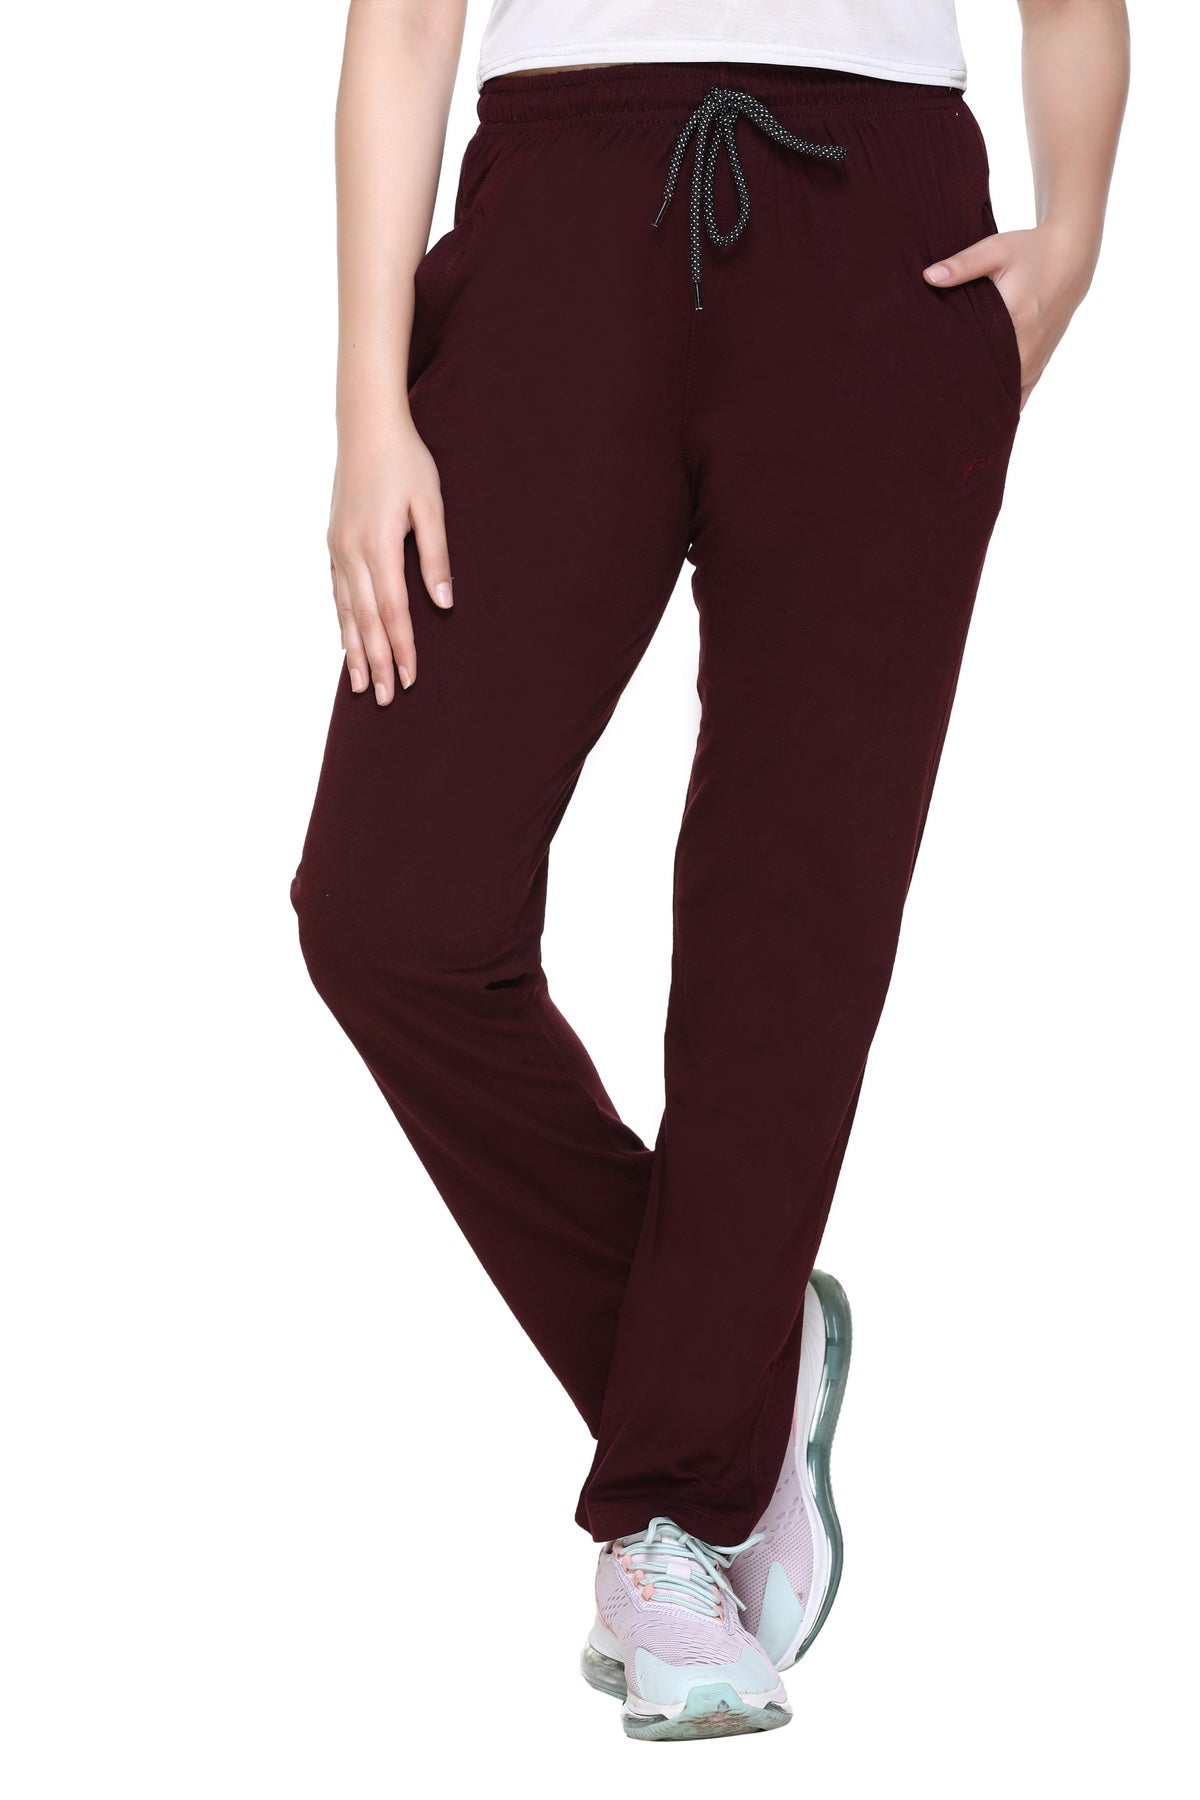 Stylish Cotton Track Pants For Women (Pack of 3) At Best Prices